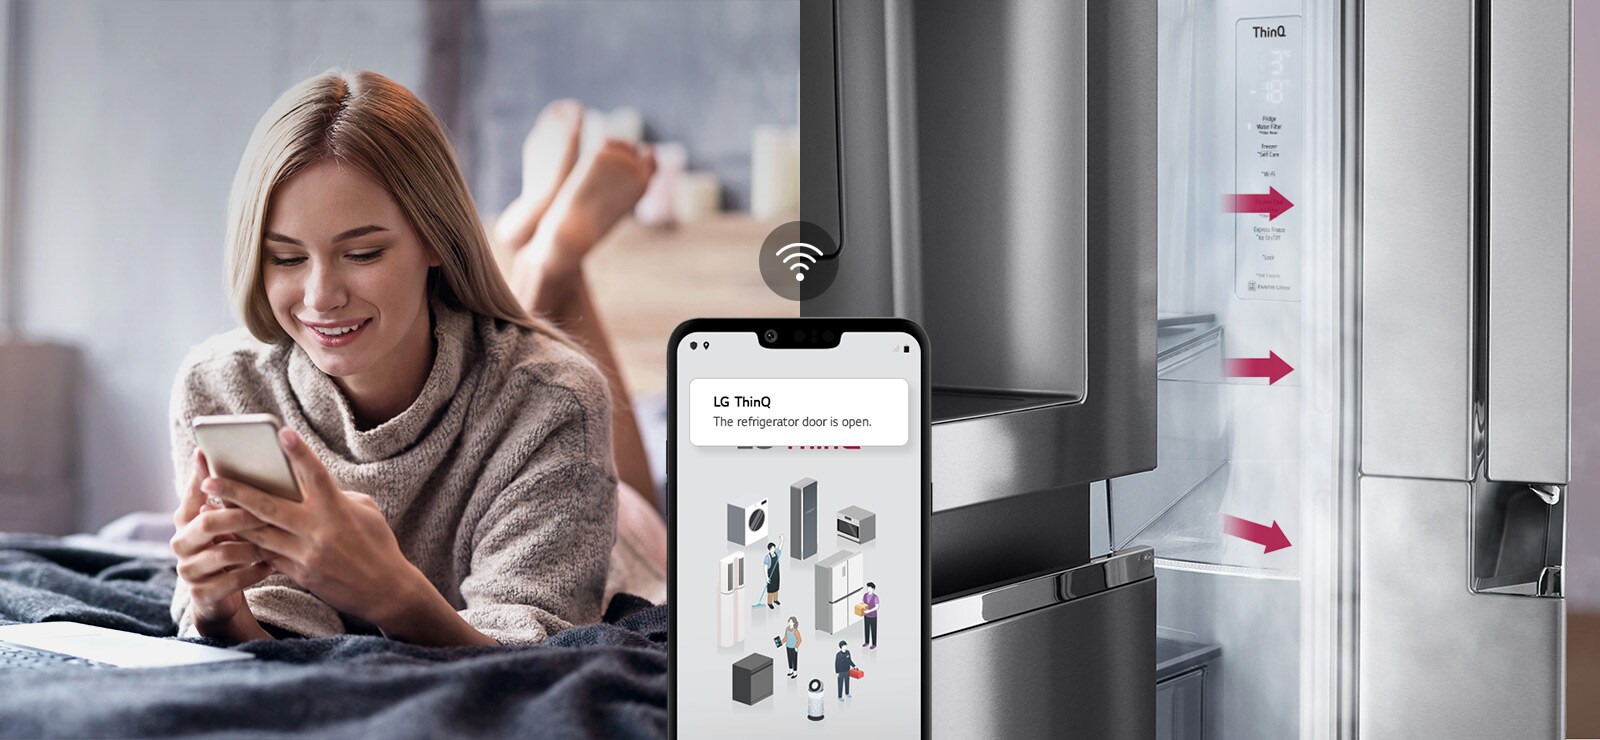 A woman rests on a bed looking at her phone screen in an image. The second image shows that the refrigerator door has been left open. Connect and control from anywhere